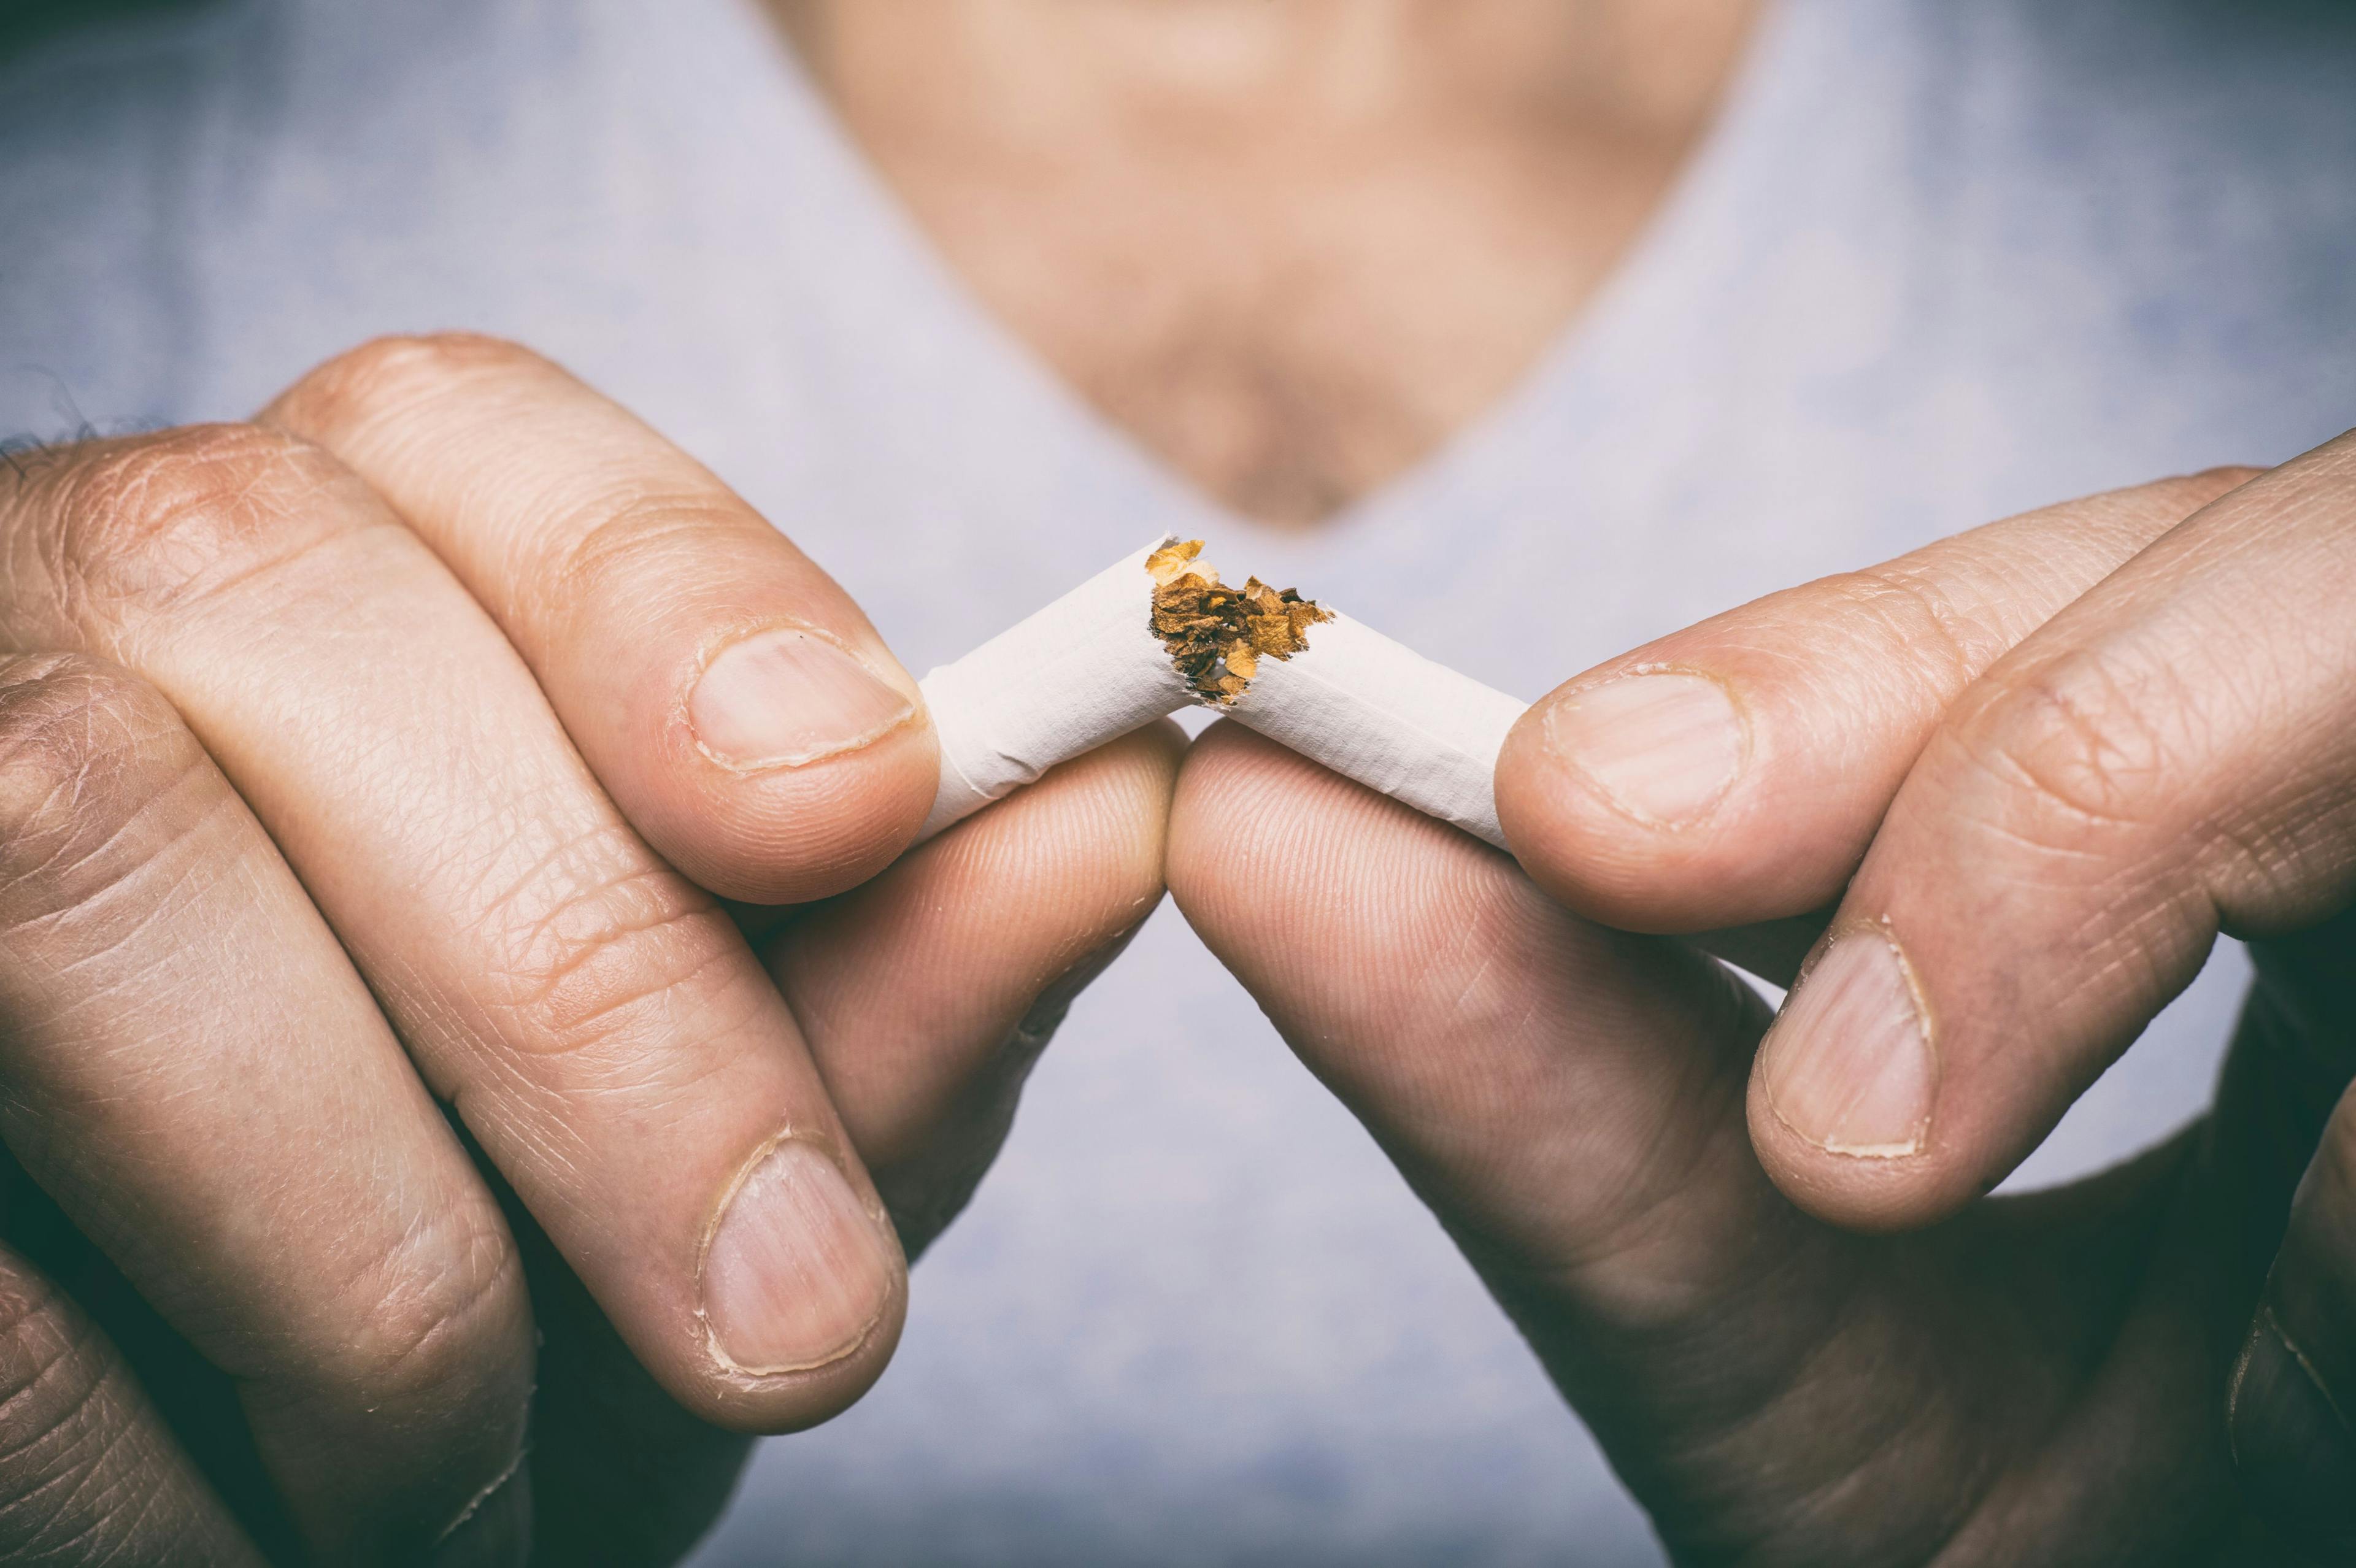 Smoking Linked to Inflammation and Increased Disease Activity in SLE